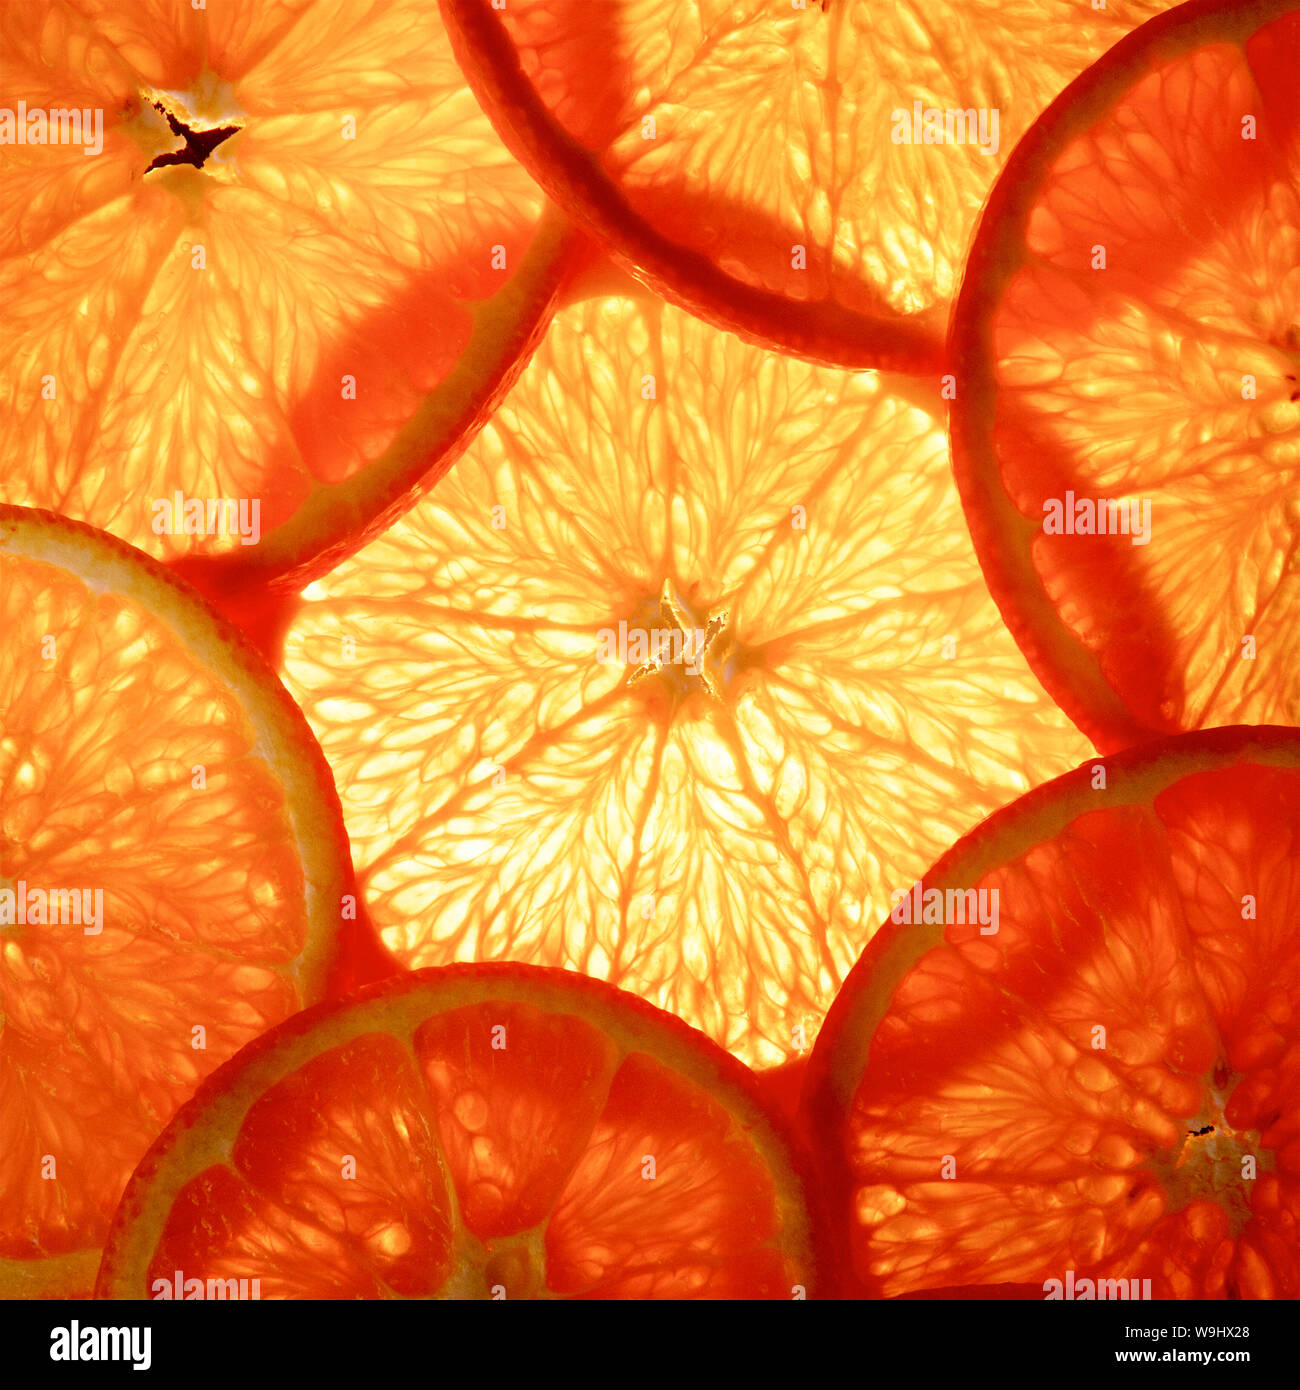 Thin slices of an orange to create a colourful artistic background. Stock Photo